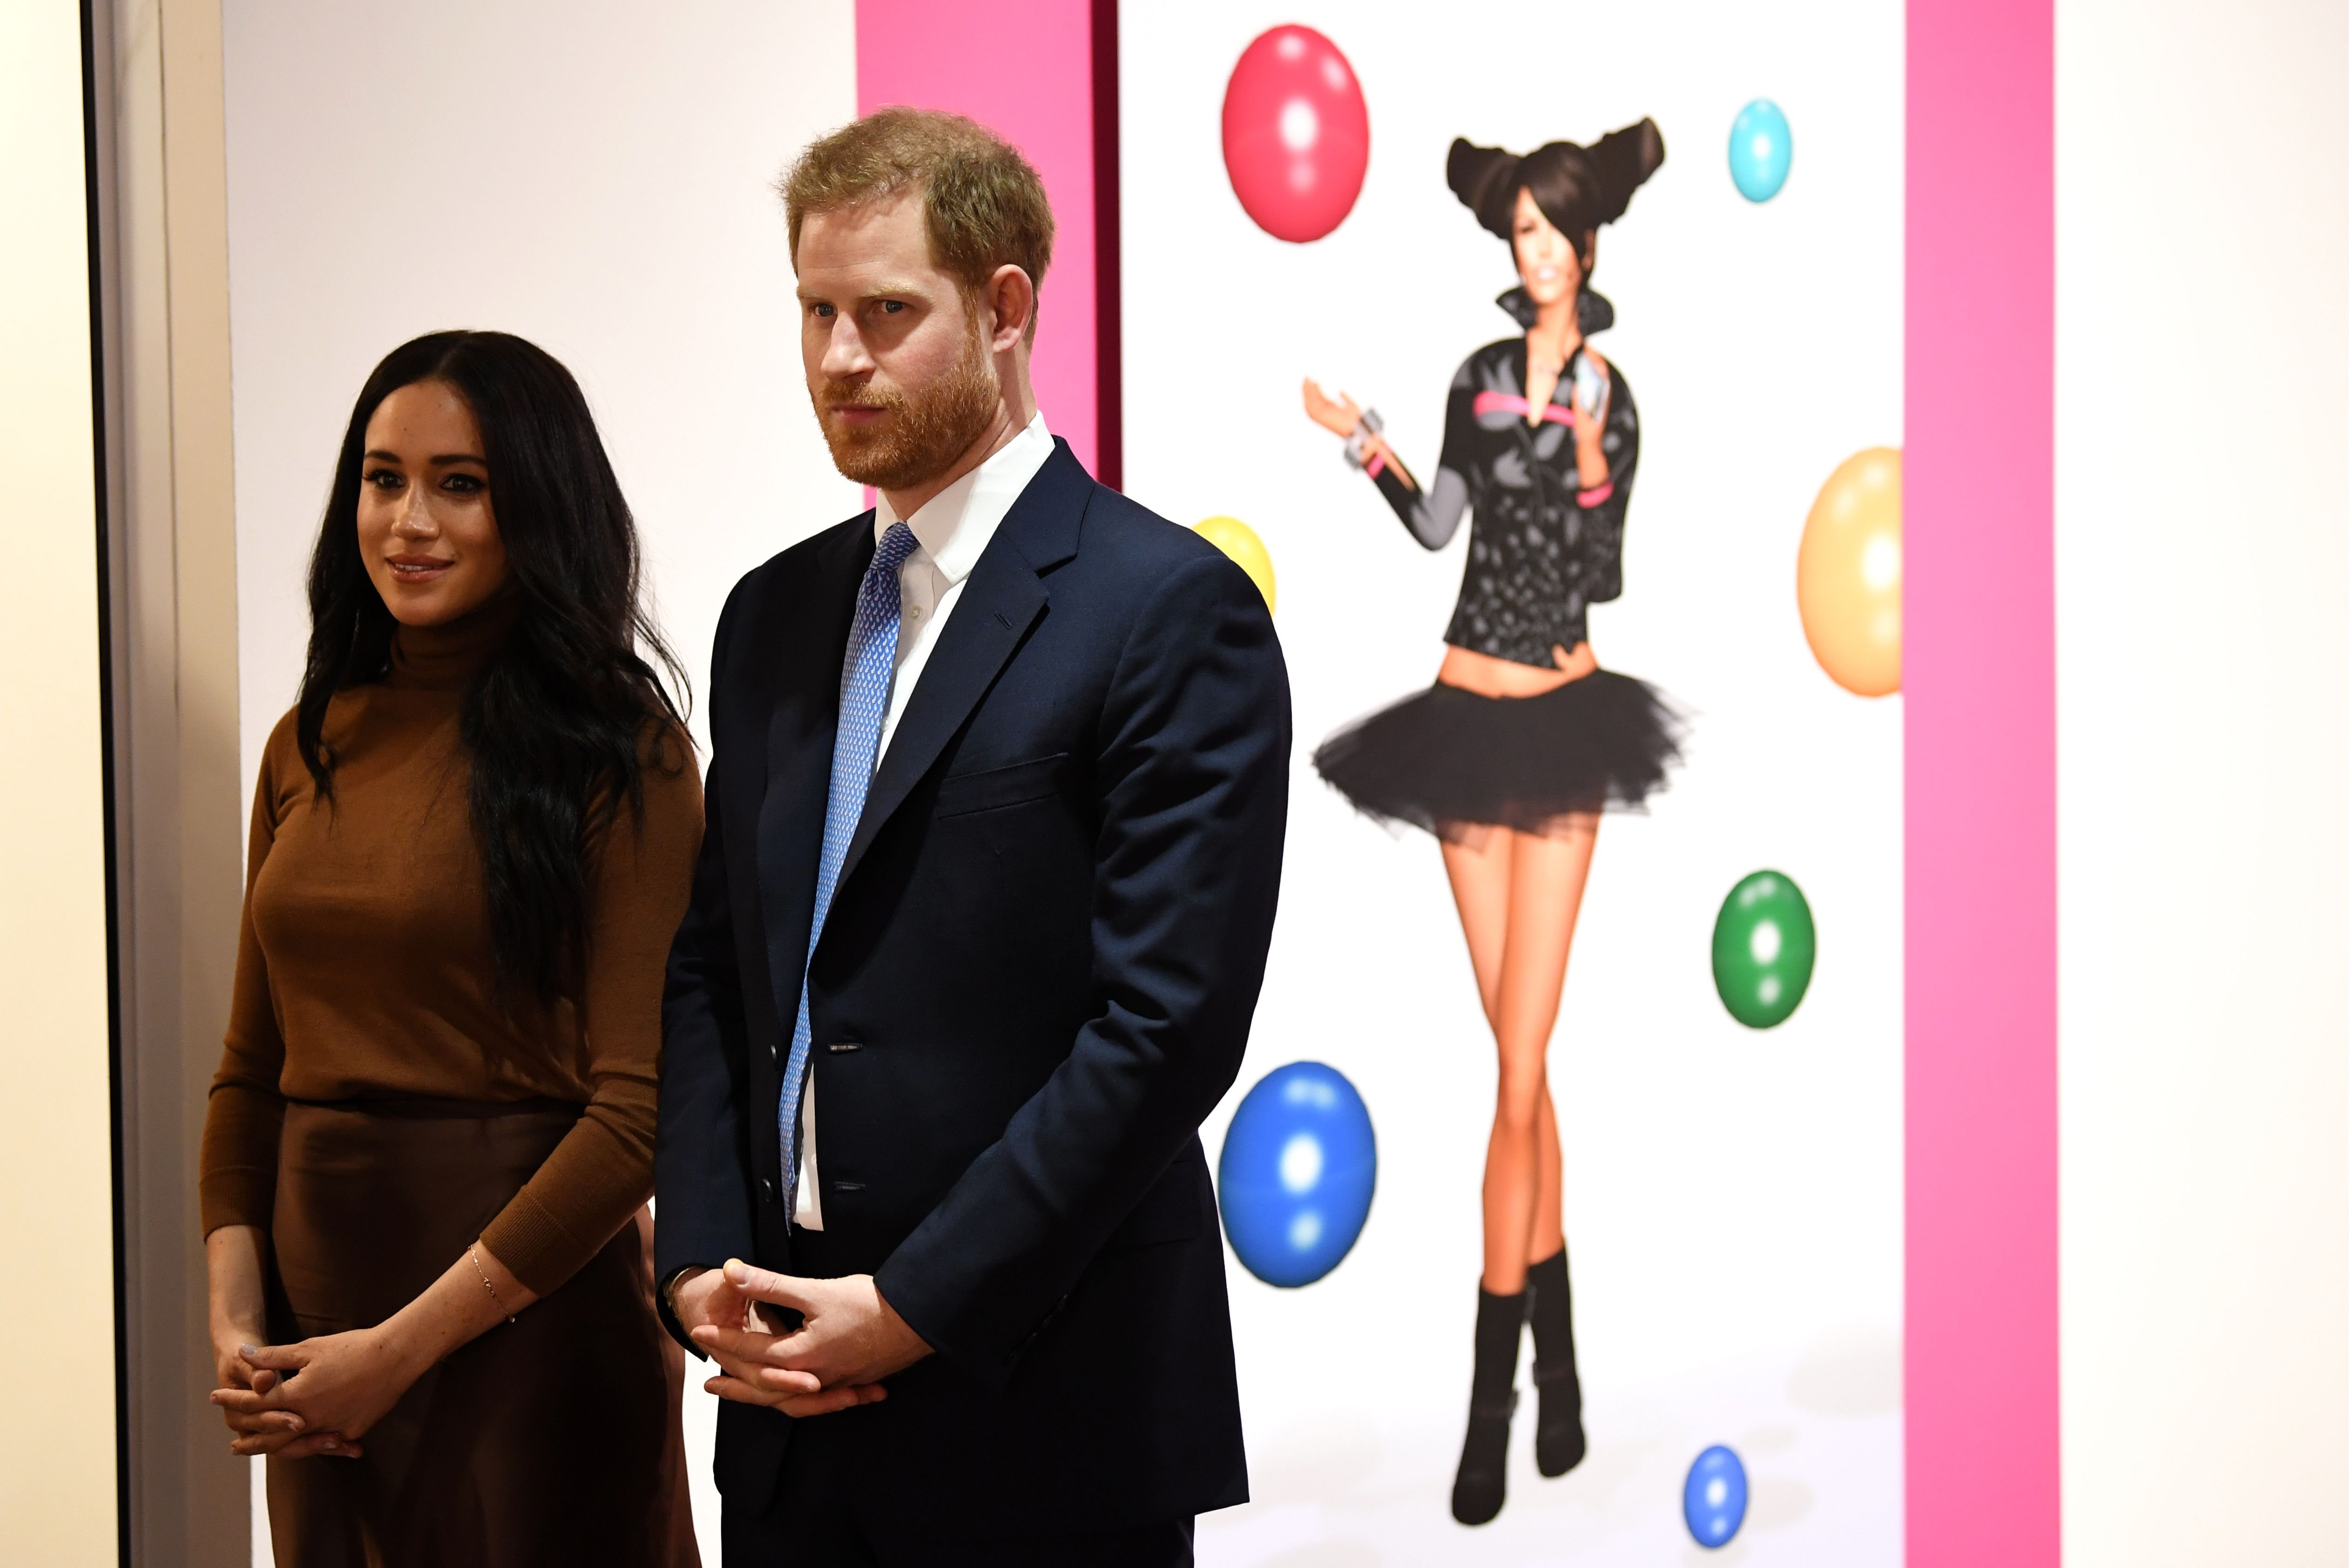 Duchess Meghan and Prince Harry view a special exhibition of art at the Canada Gallery during their visit to Canada House on January 7, 2020, in London, England | Photo: Daniel Leal-Olivas - WPA Pool/Getty Images